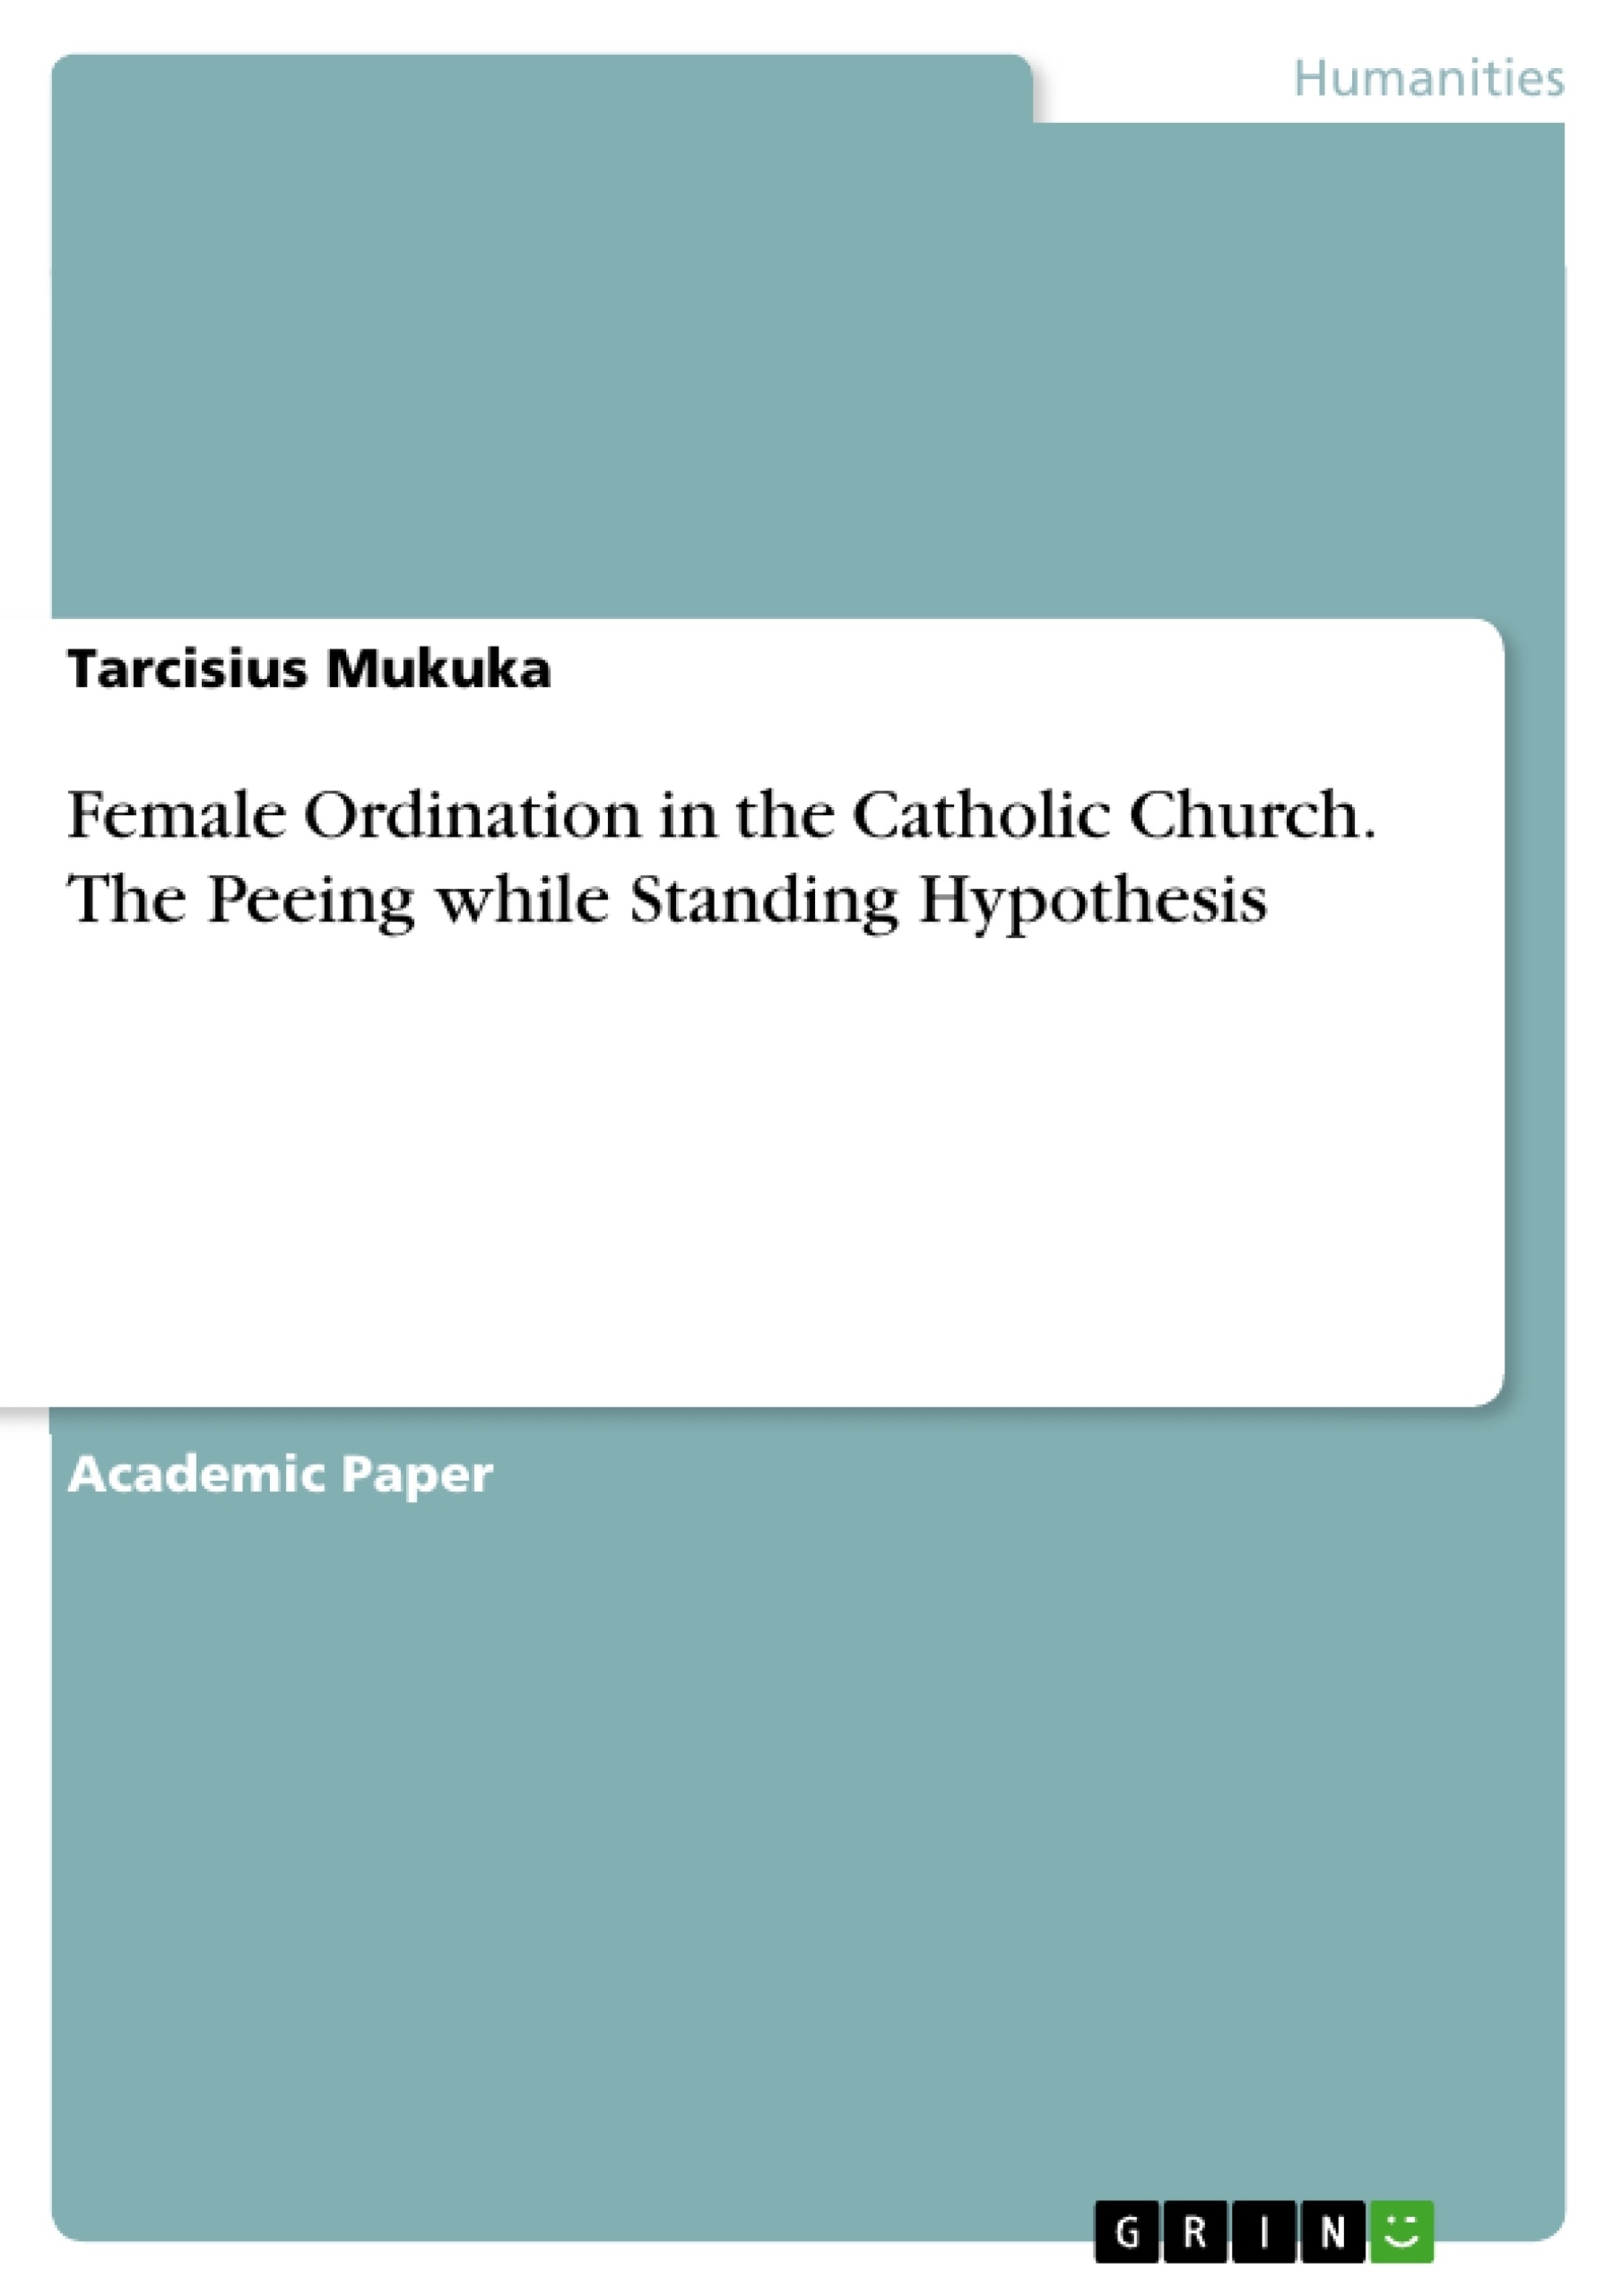 Título: Female Ordination in the Catholic Church. The Peeing while Standing Hypothesis